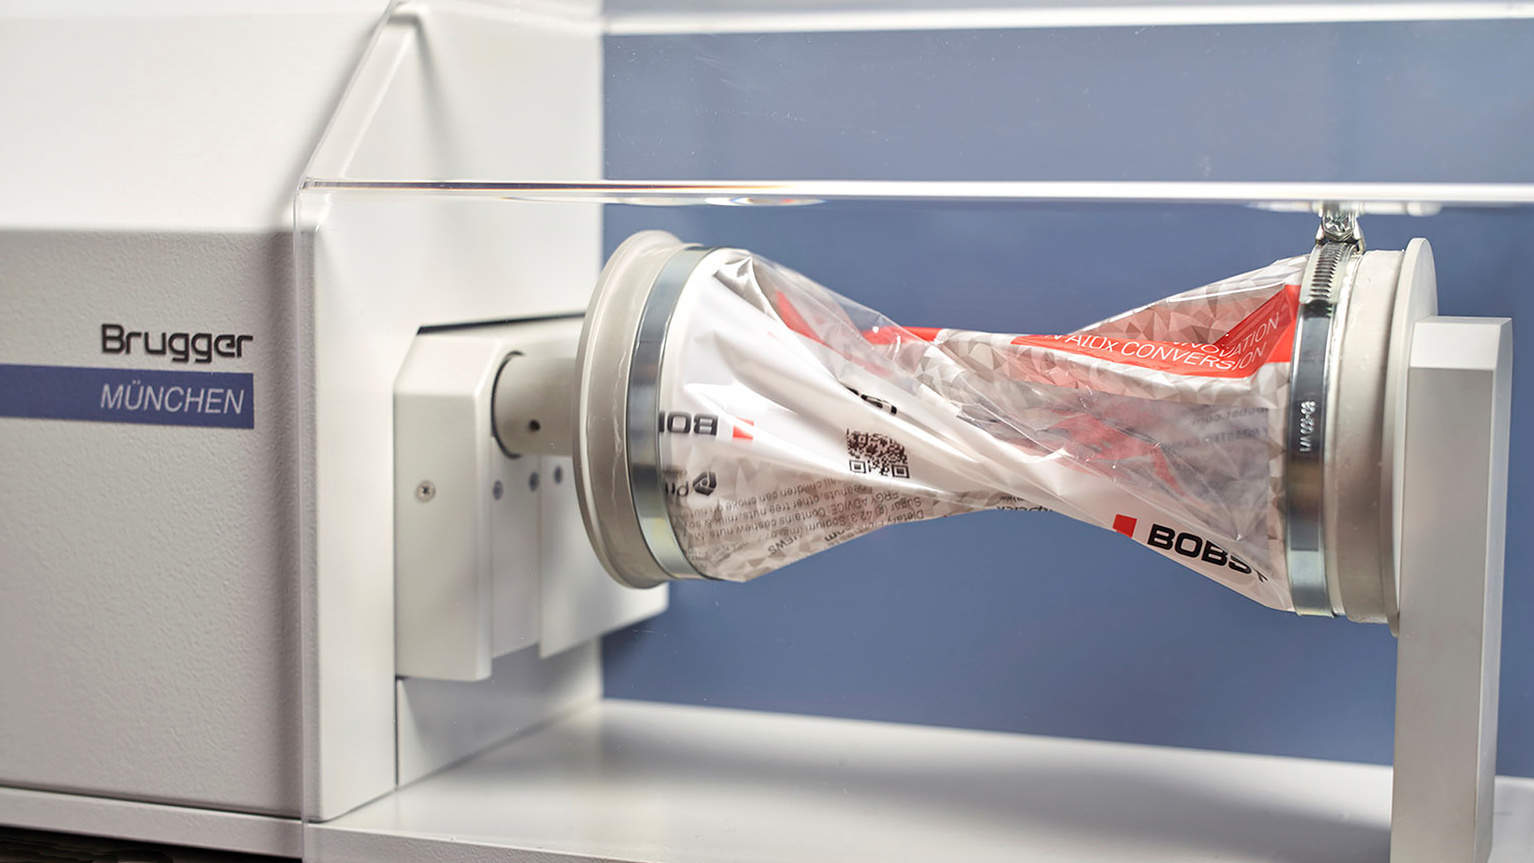 Bobst offers in-house barrier and adhesion measuring service for film converters